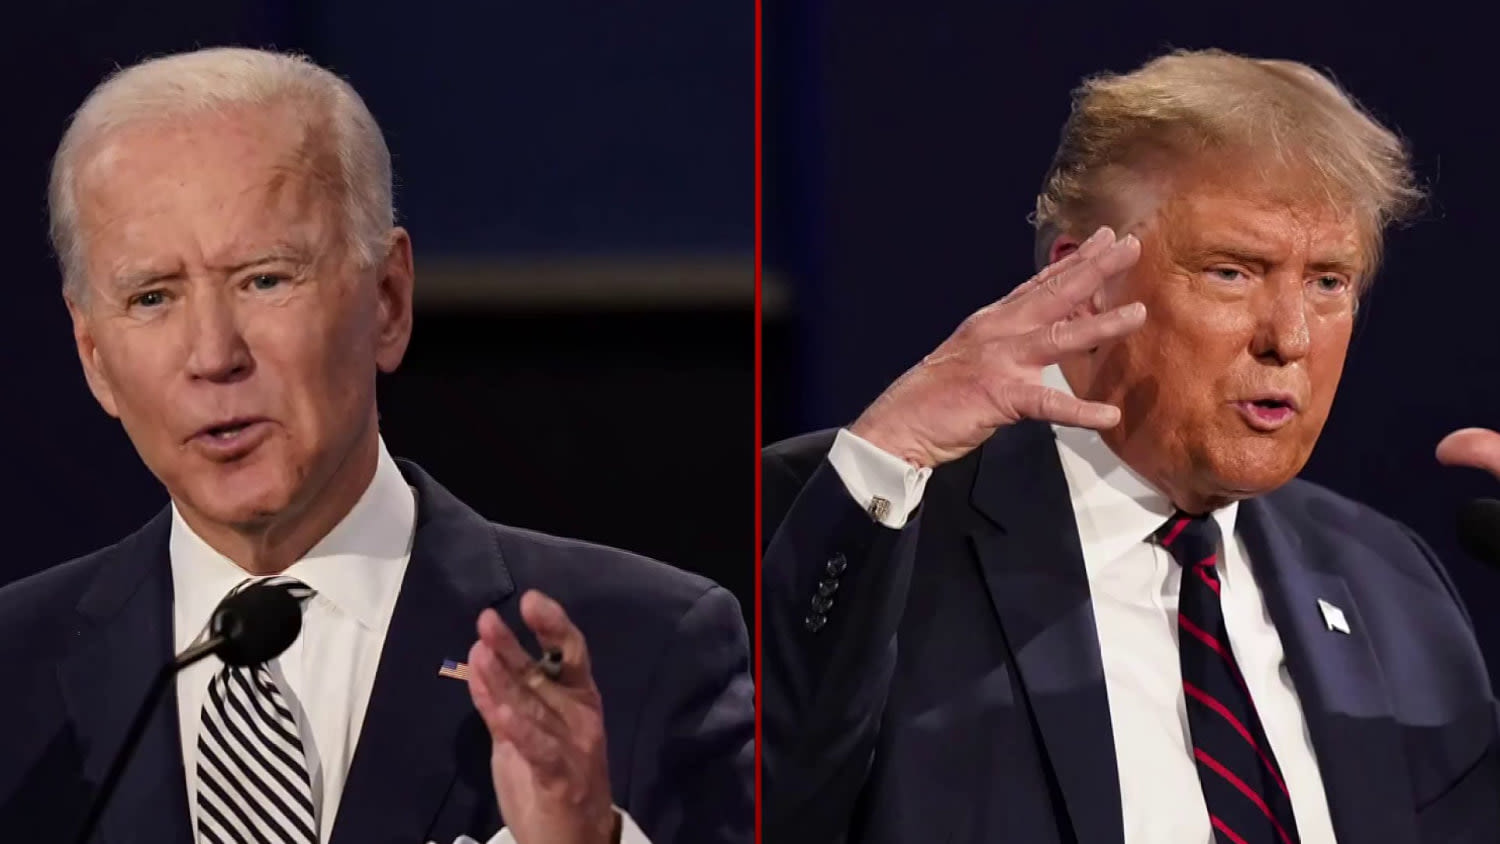 ‘An unprecedented spectacle’: Trump and Biden take different approaches to prep for first debate